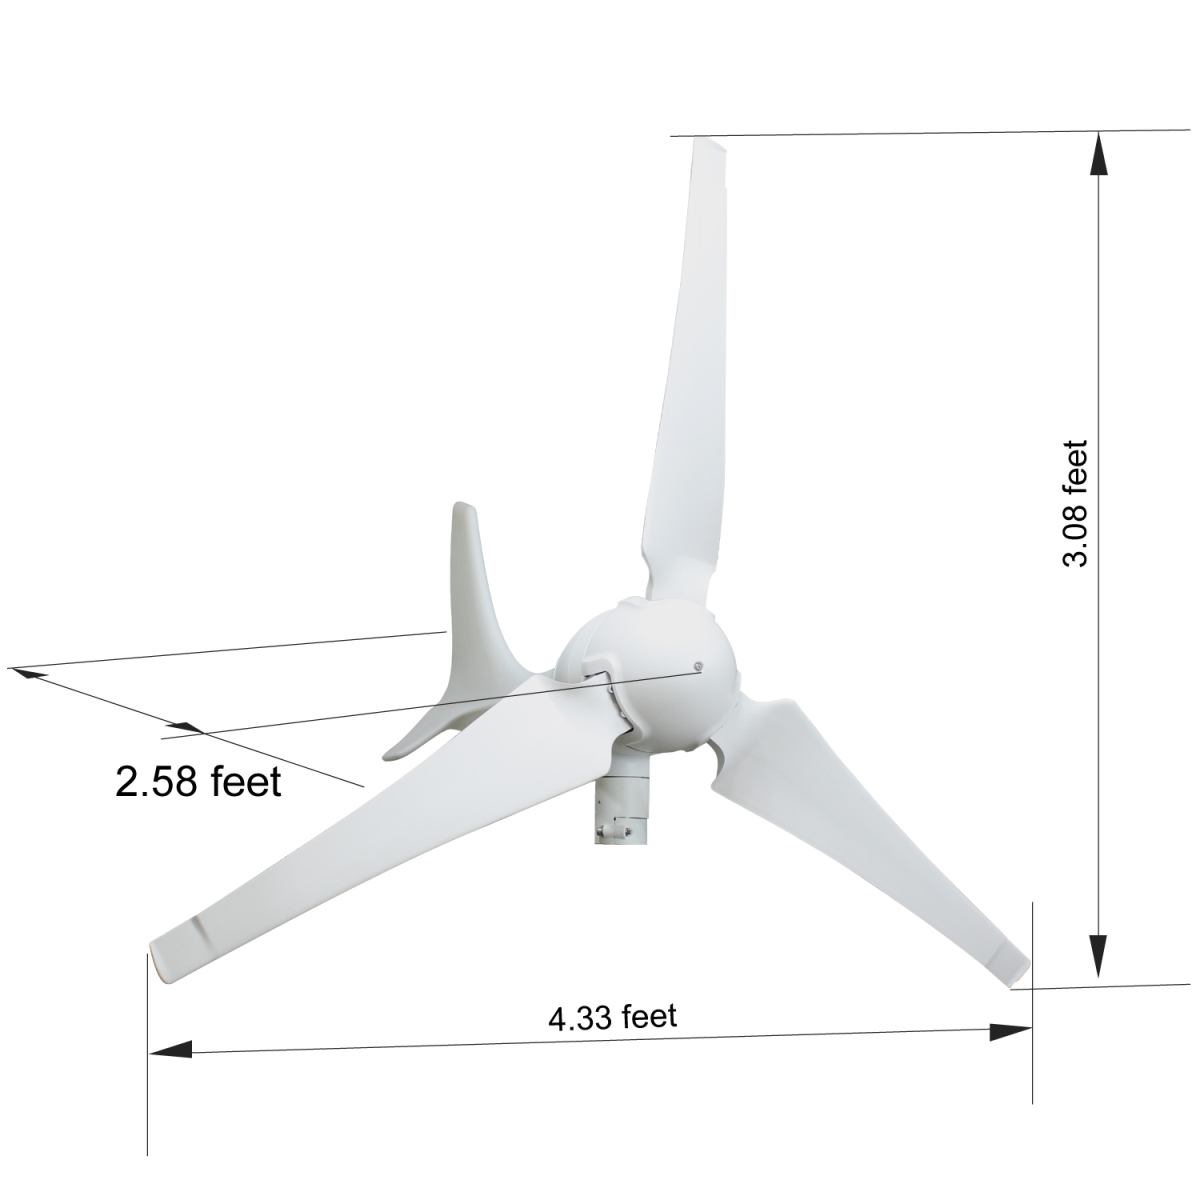 Picture of Automaxx UB0600S1BL Windmill 600W Wind Turbine Generator Kit with Bluetooth Controll, Additional Spare Blade Set